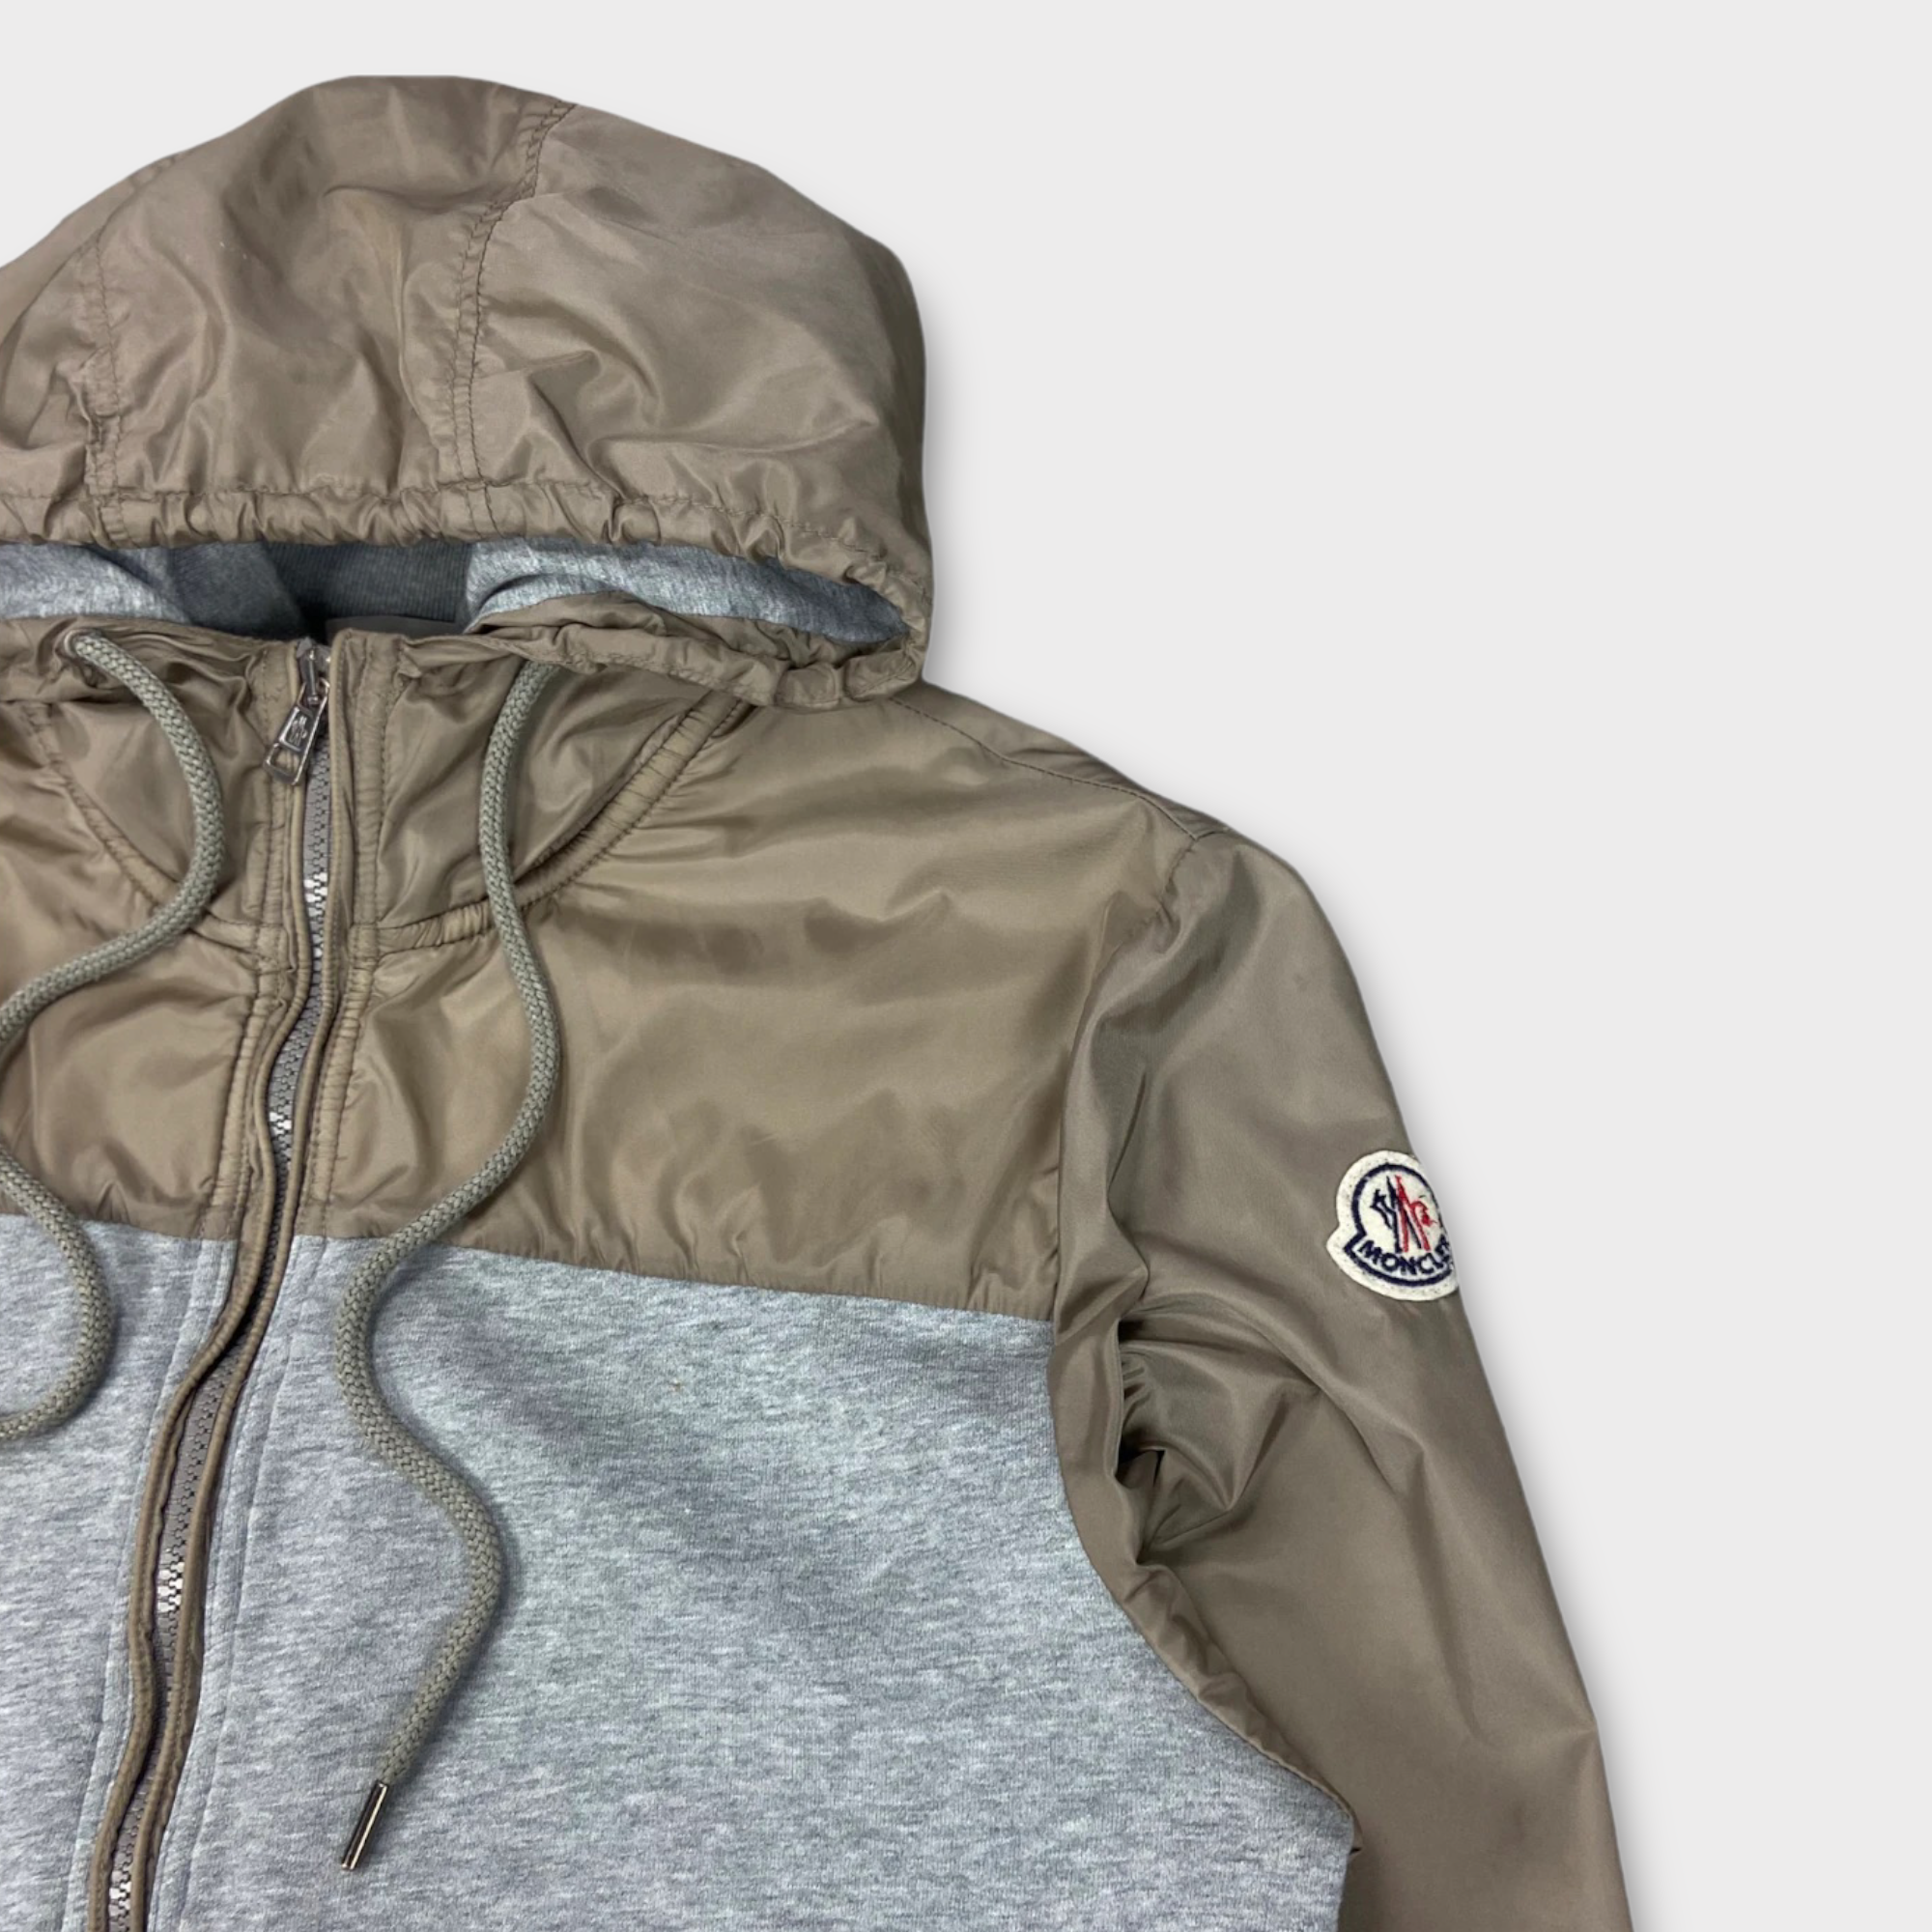 Moncler Hybrid Hooded Cardigan - Size M (Fits S)